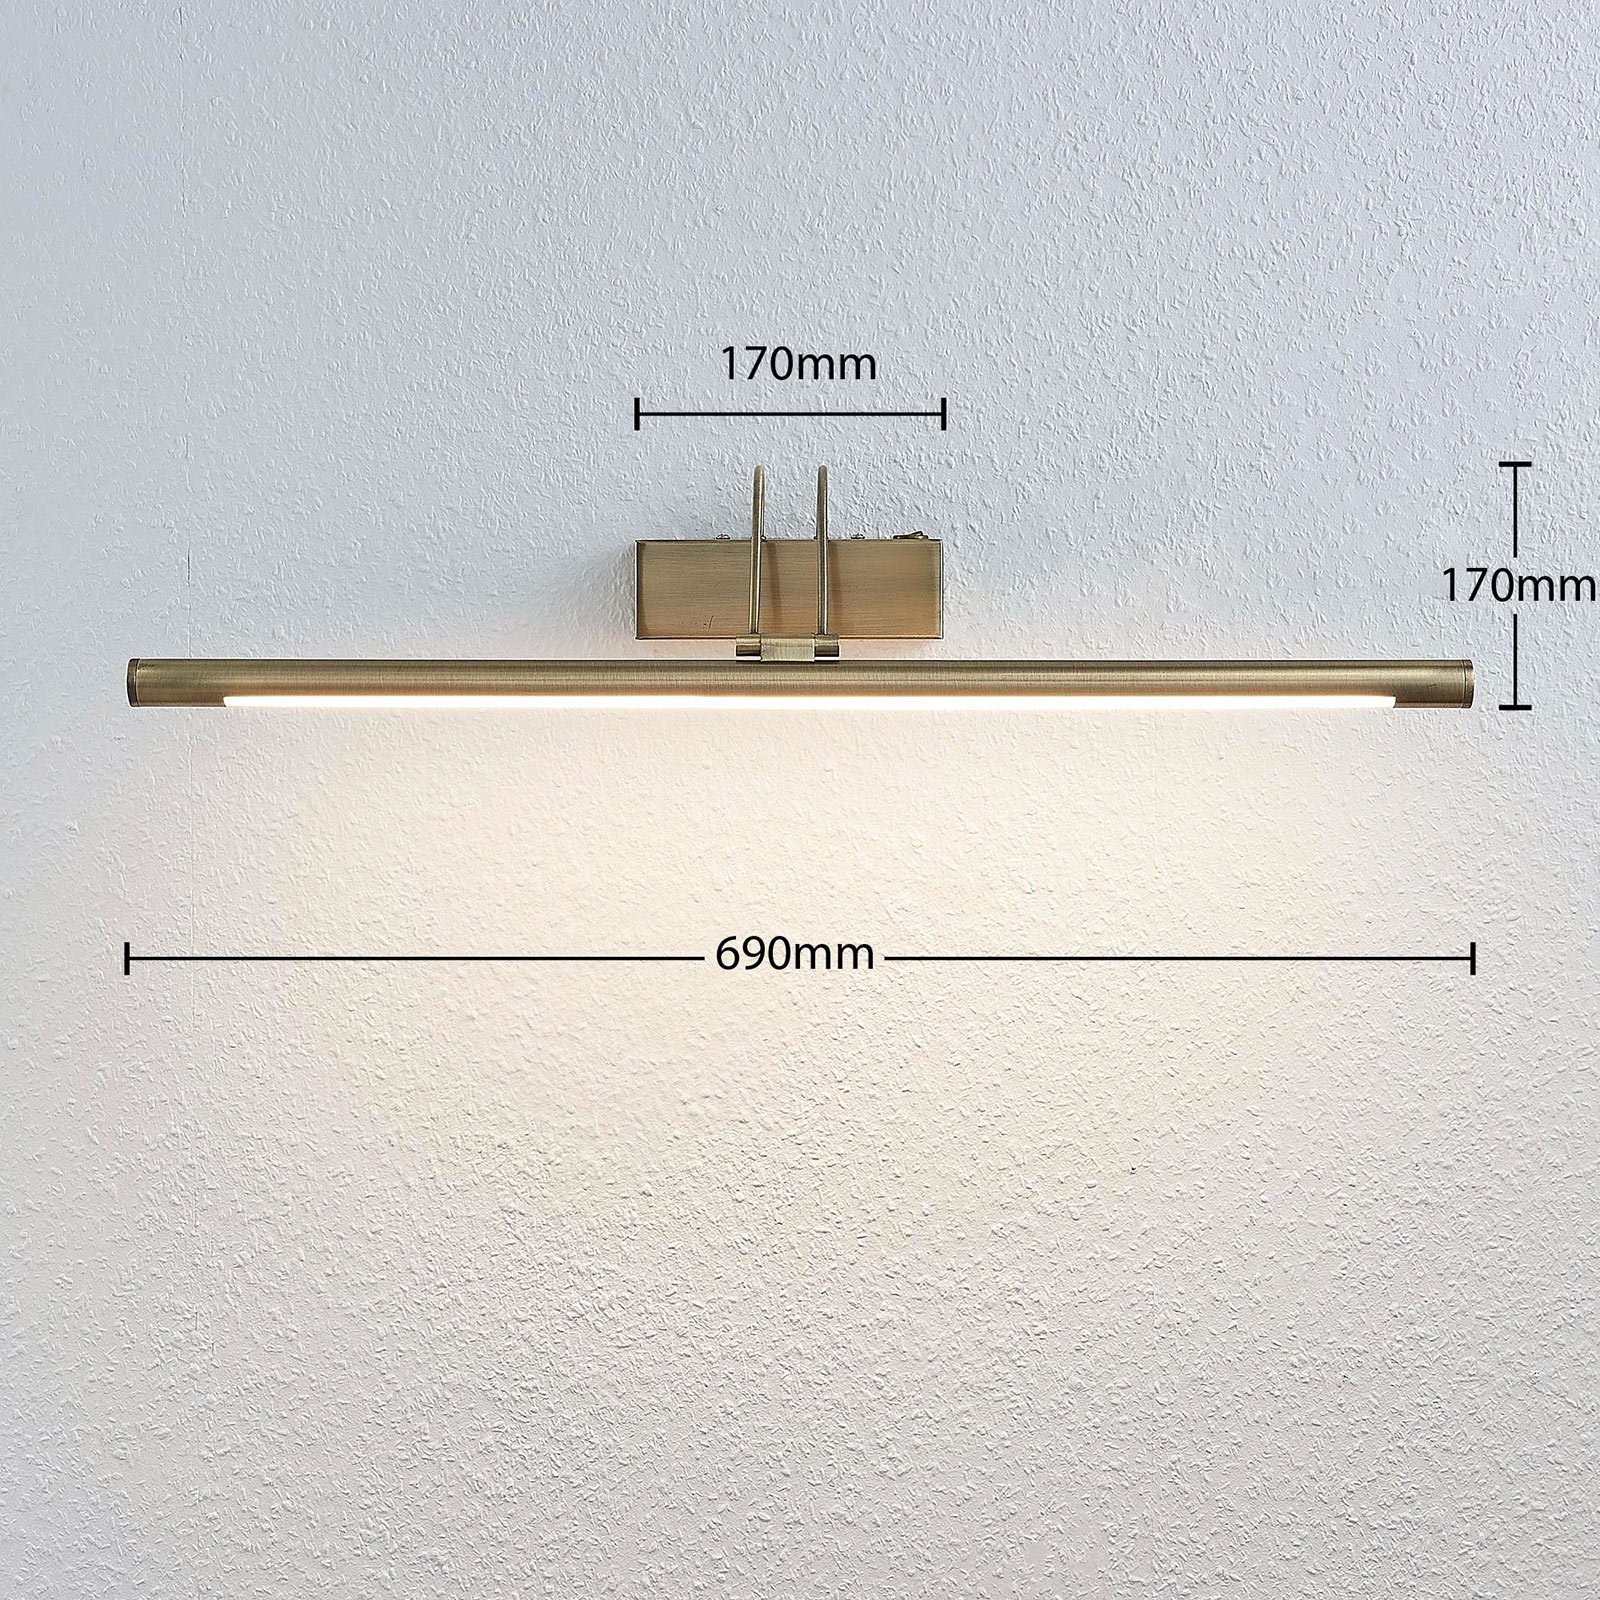 Mailine LED picture light, switch, antique brass